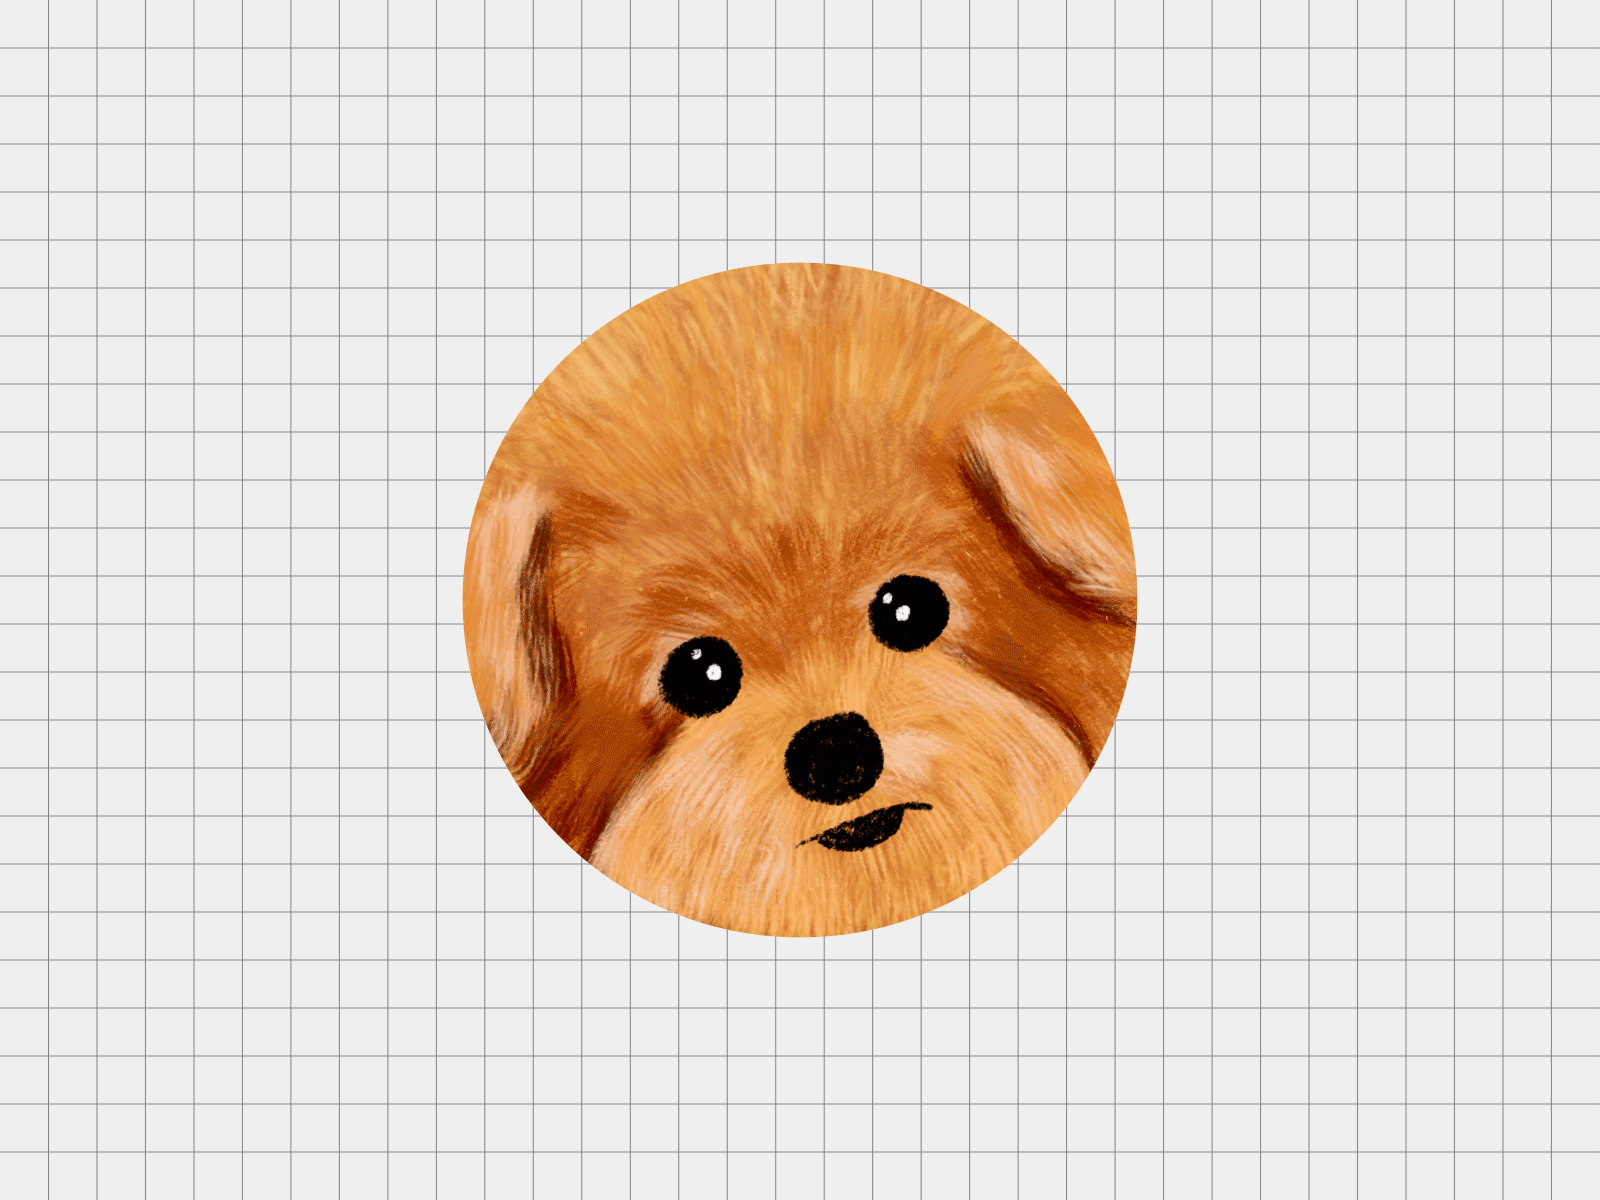 Dog Circle GIF Loop by Jormation on Dribbble